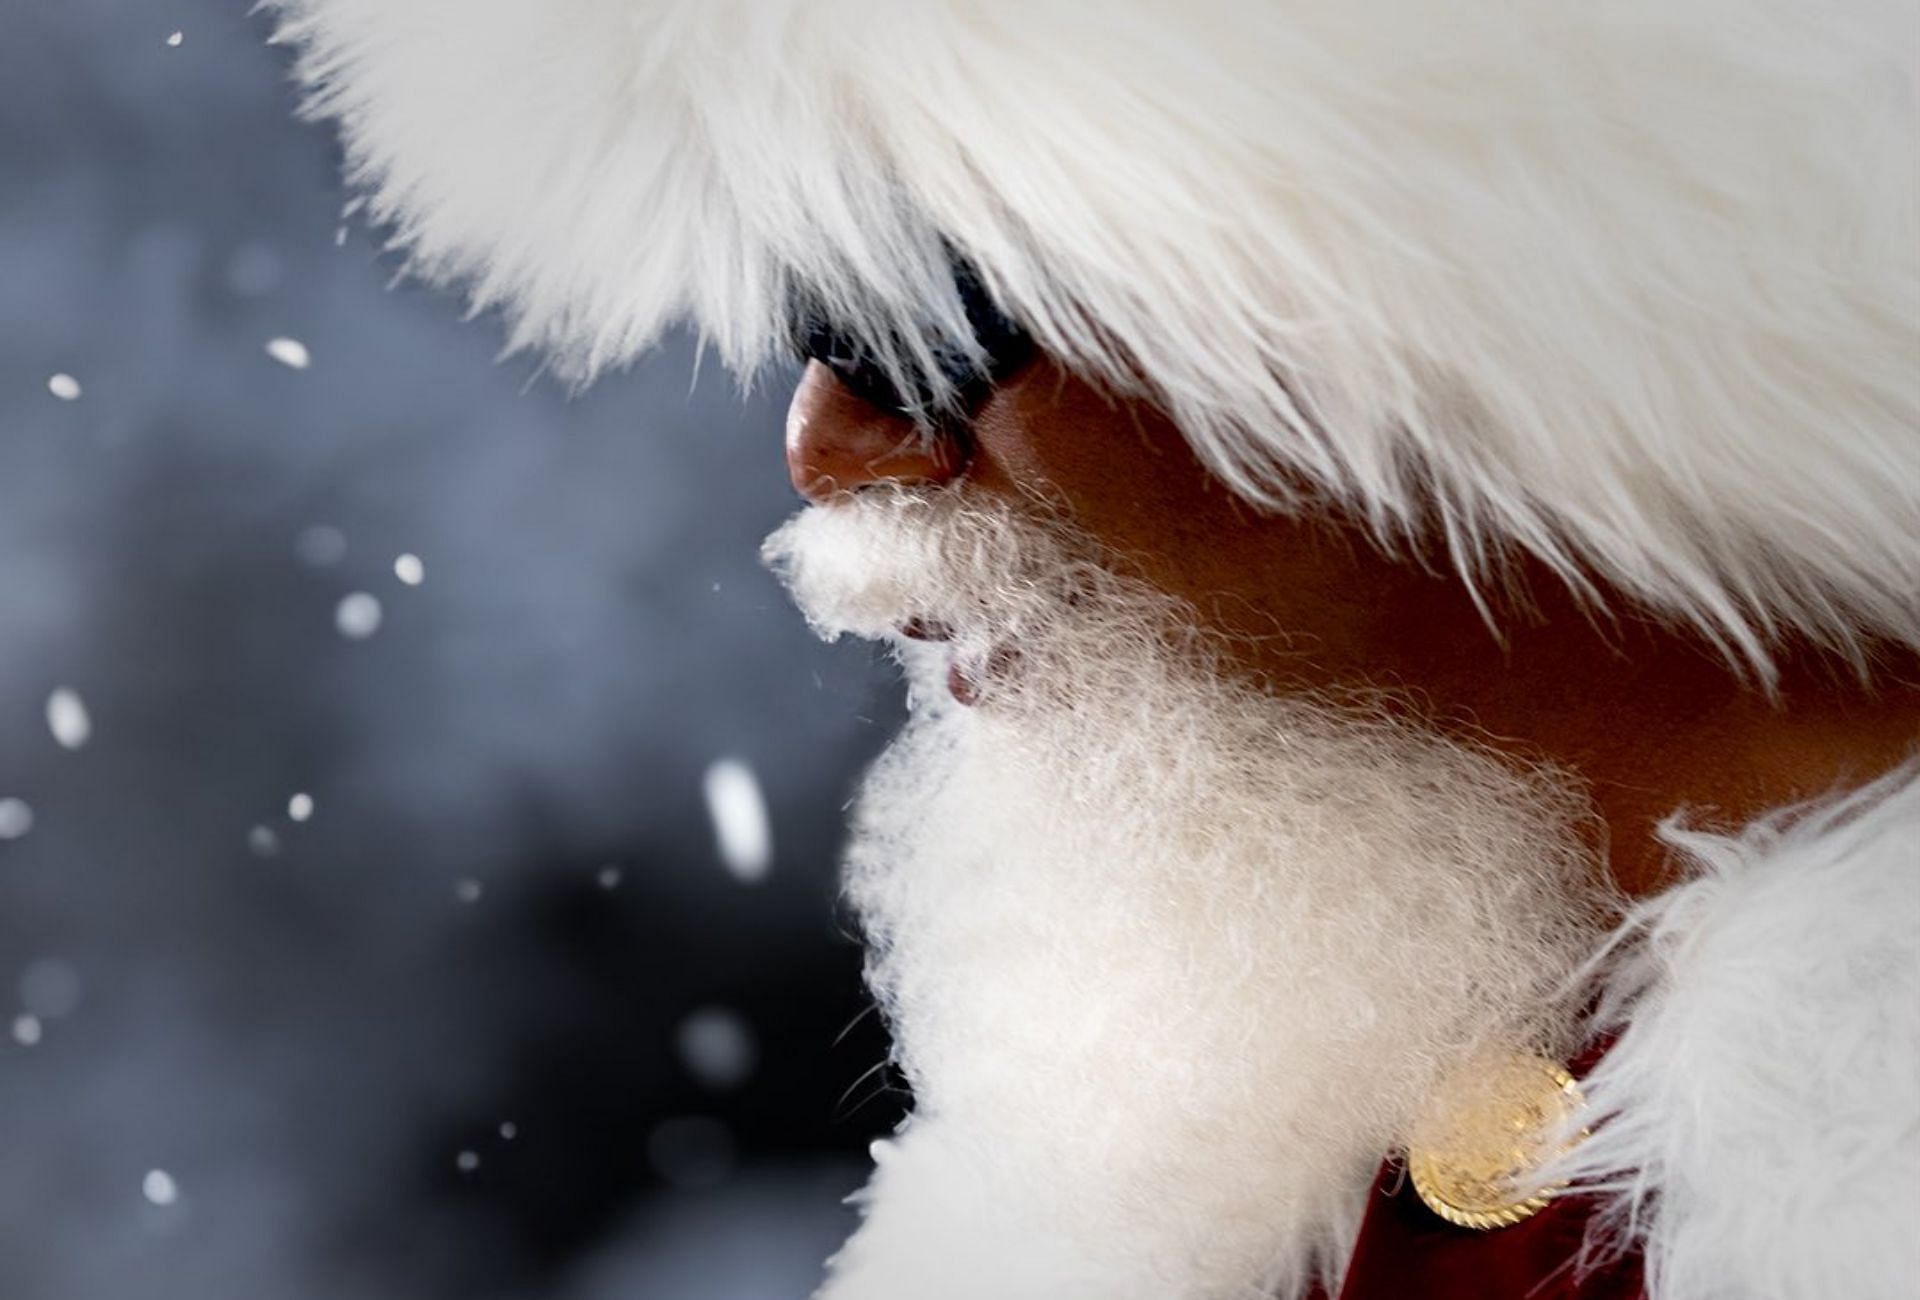 Tiger Woods as Mac Daddy Santa Claus for the TaylorMade Christmas video (Image via X @TaylorMadeGolf).